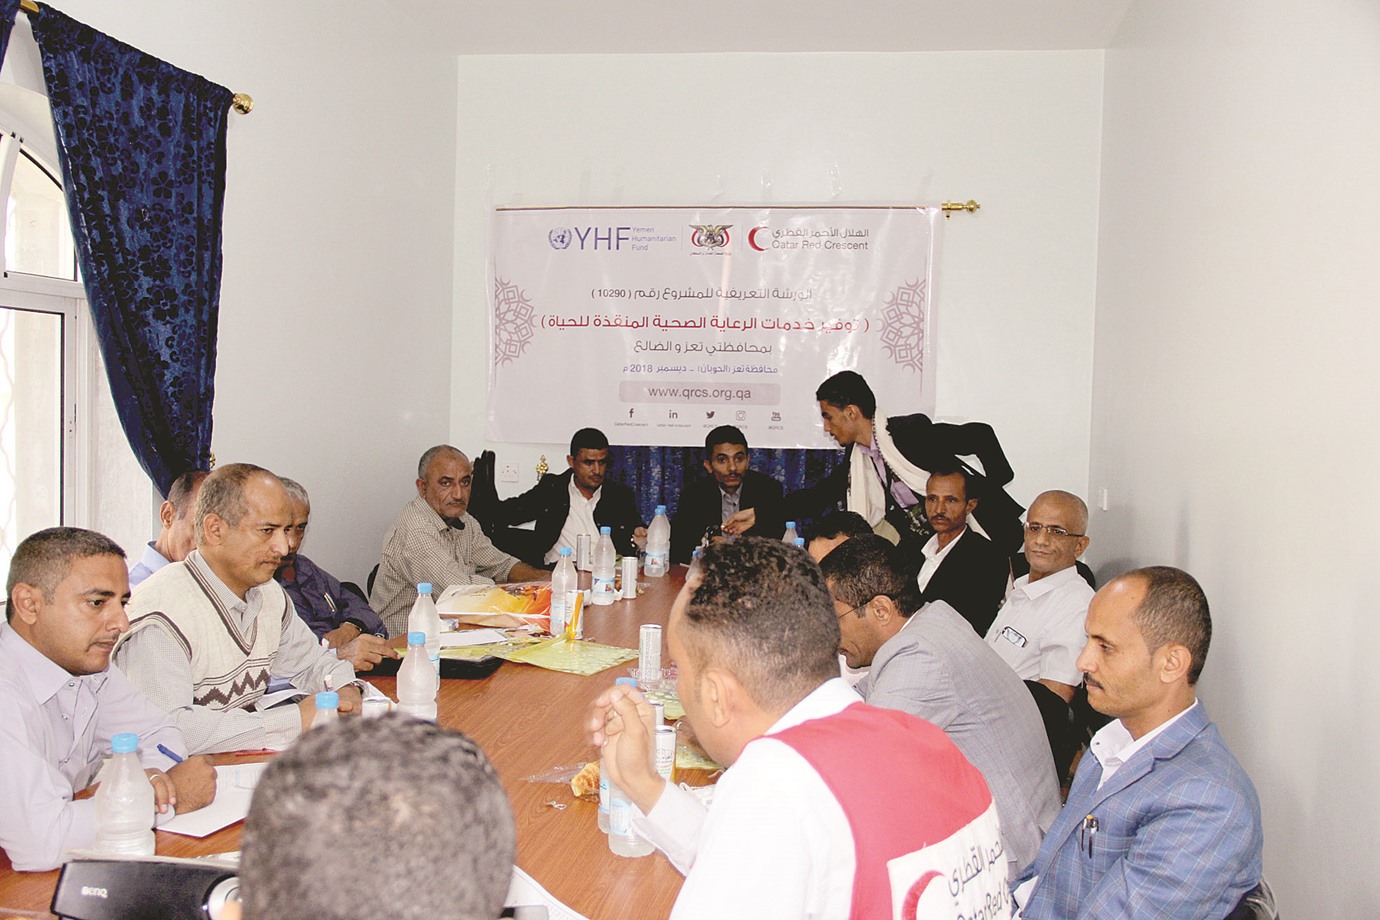 QRCS, YHF sign pact to support Yemen hospitals